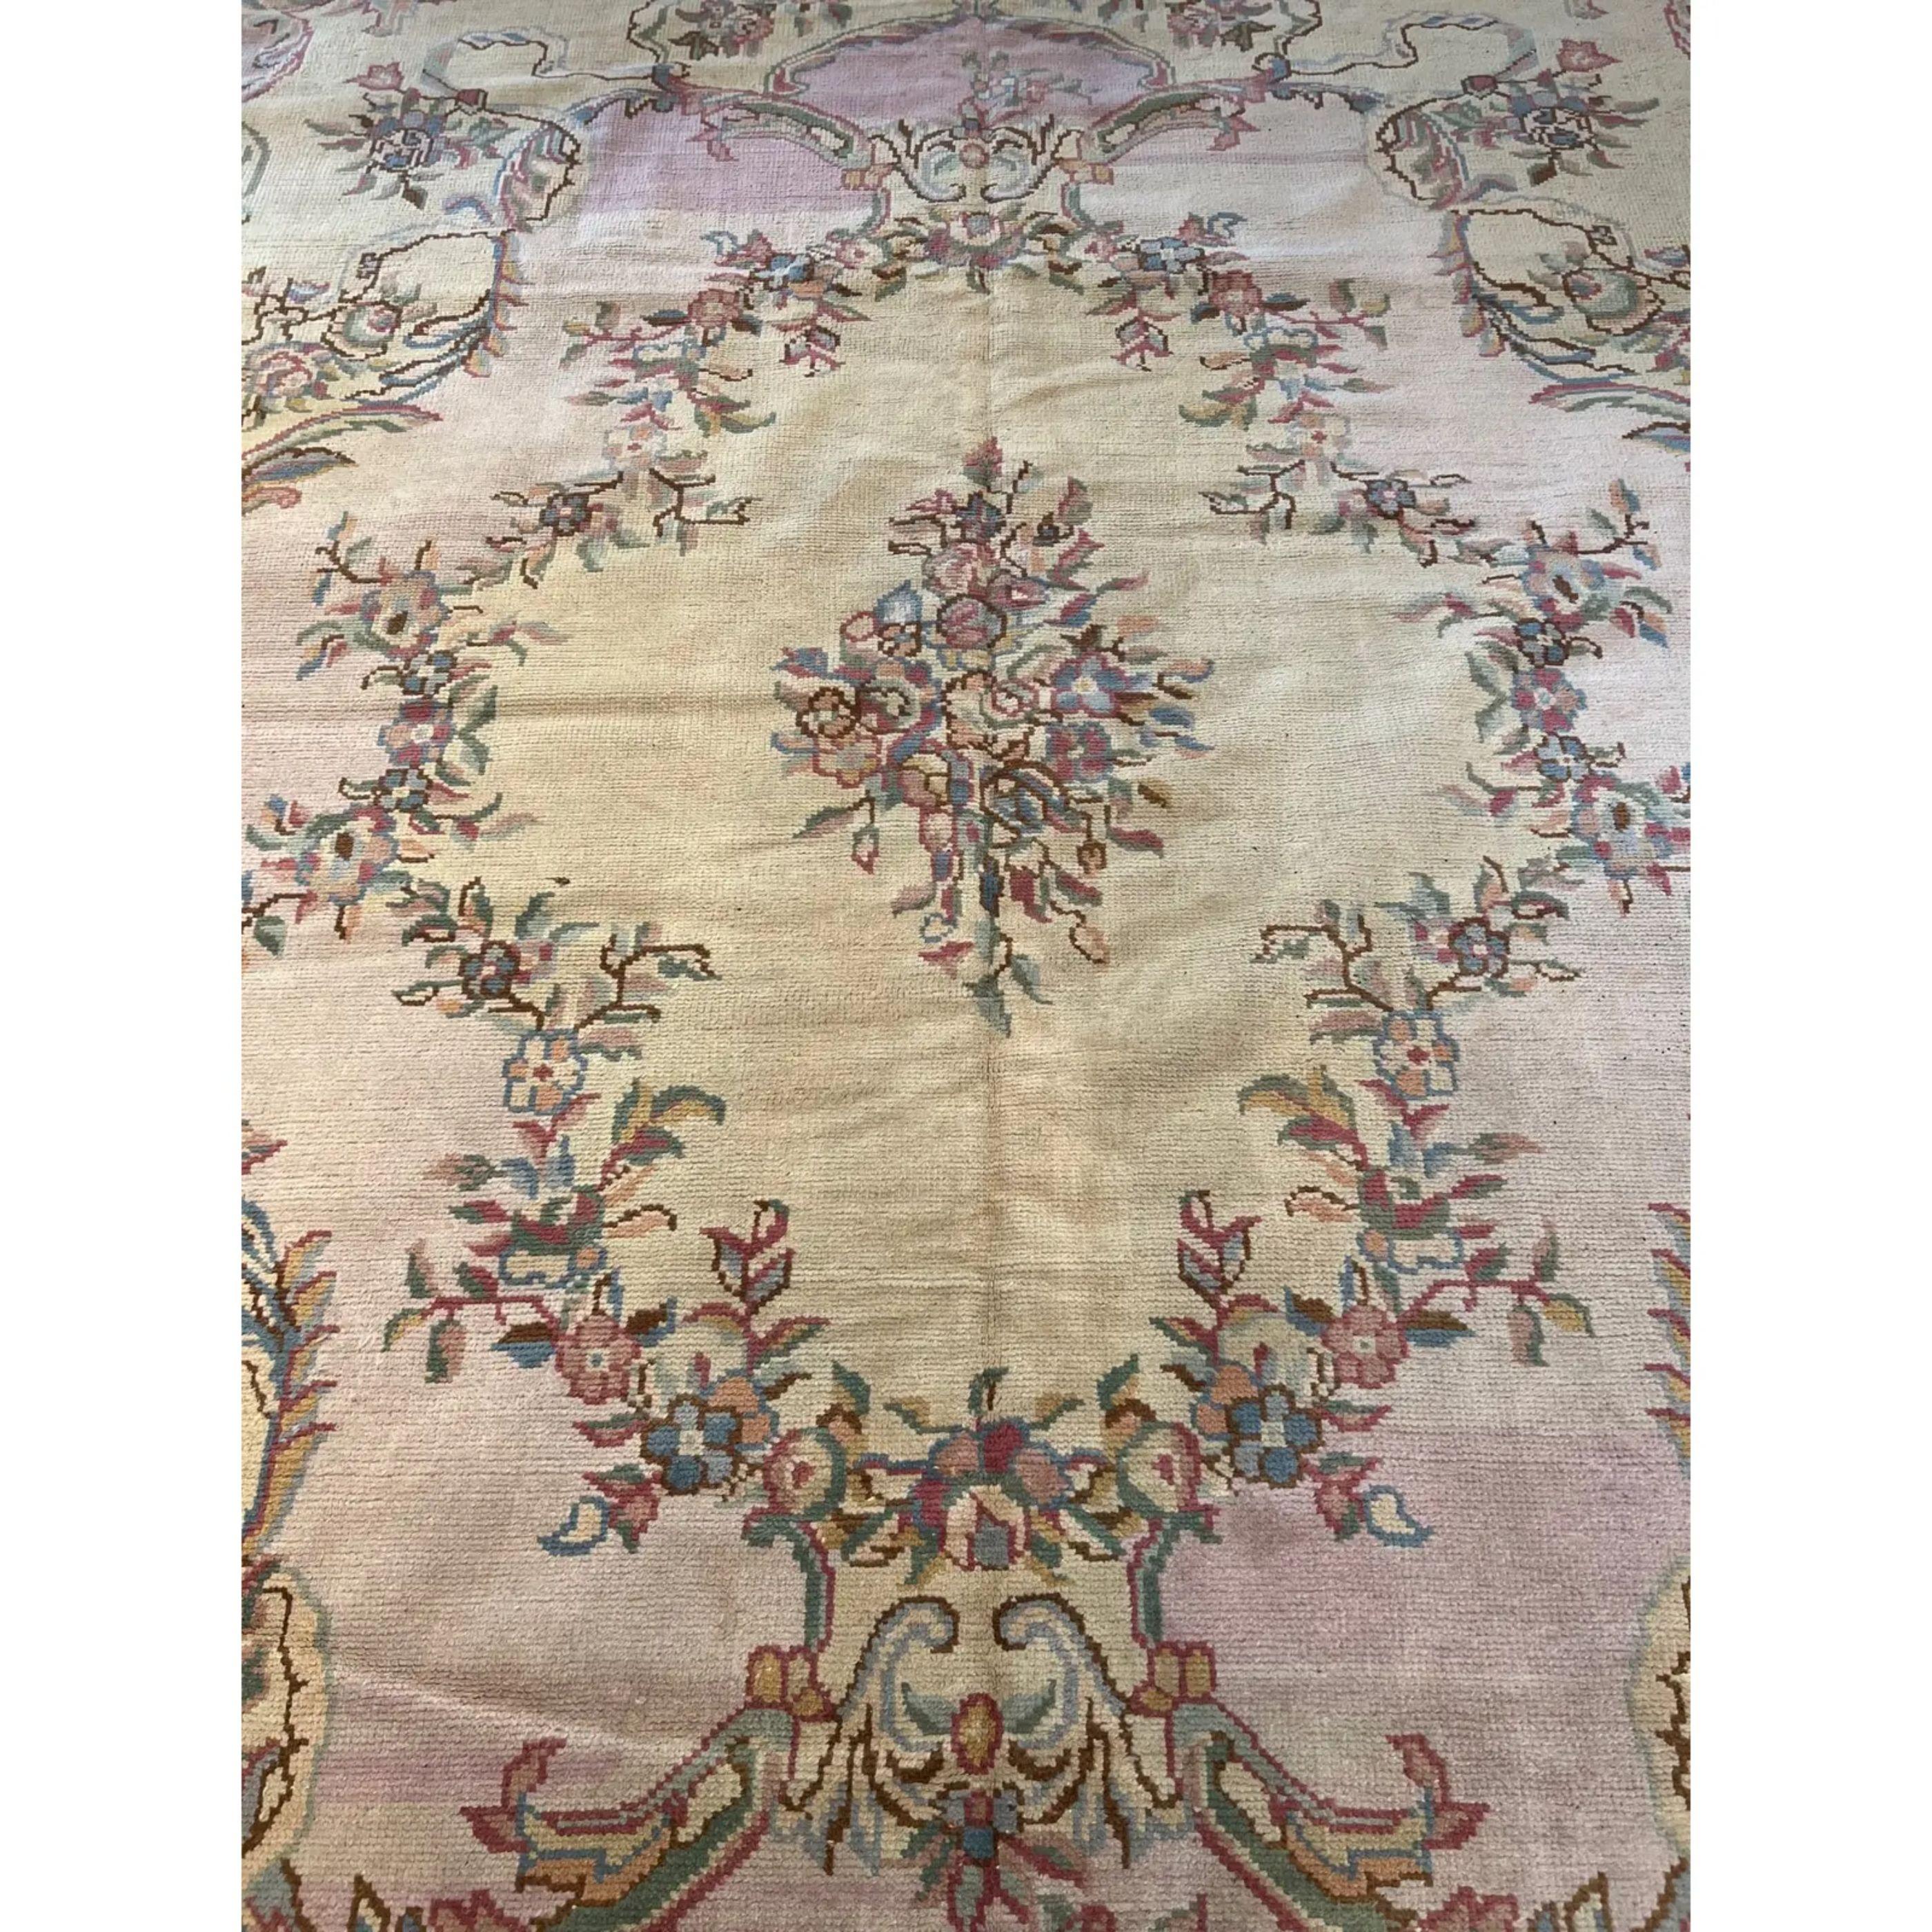 Traditionally, the Indian rugs are some of the most desirable rugs amongst collectors and interior designers. India is known for their production of fine Indian textiles, palace size carpets, magnificent shawls and Art Deco rugs that were influenced